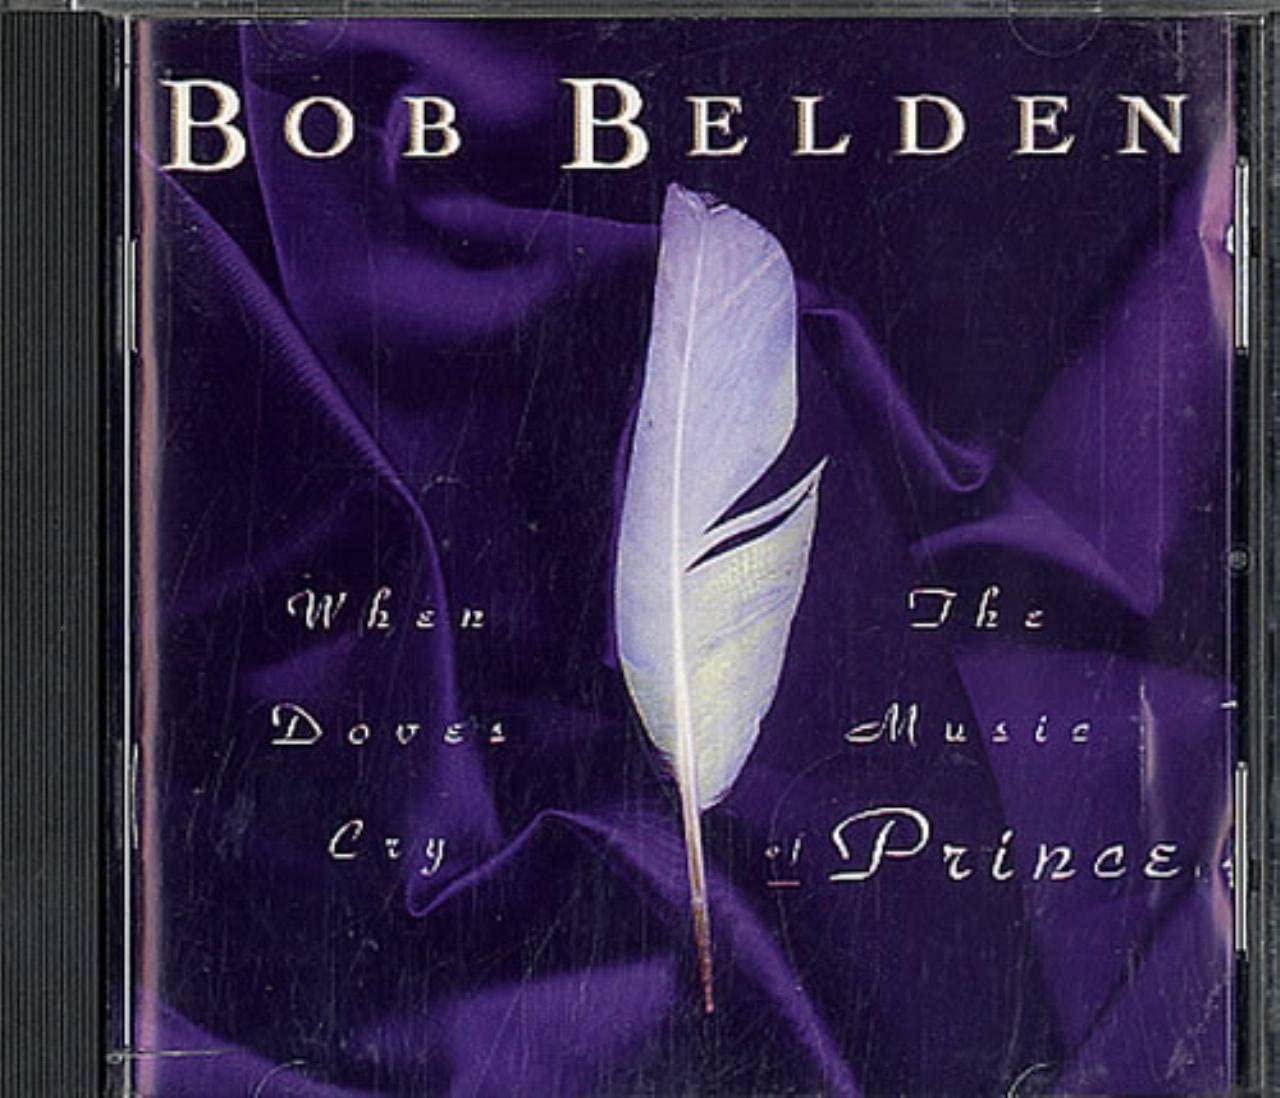 Bob Belden - When Doves Cry: Music of Prince - USED CD